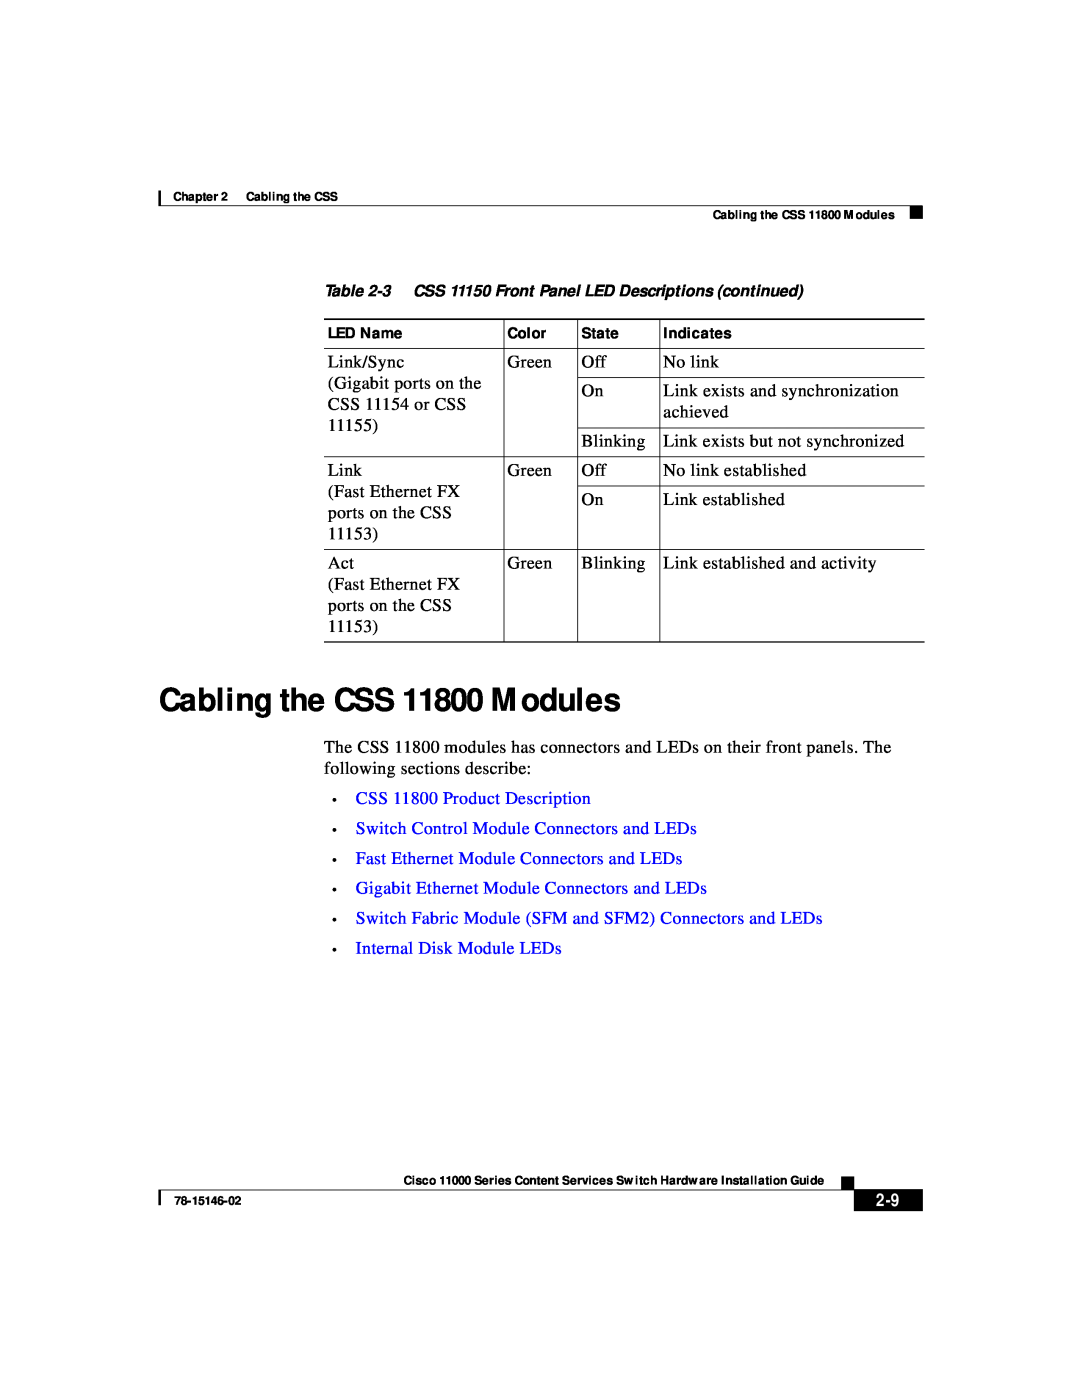 Cisco Systems 11000 Series manual Cabling the CSS 11800 Modules, CSS 11800 Product Description, Internal Disk Module LEDs 